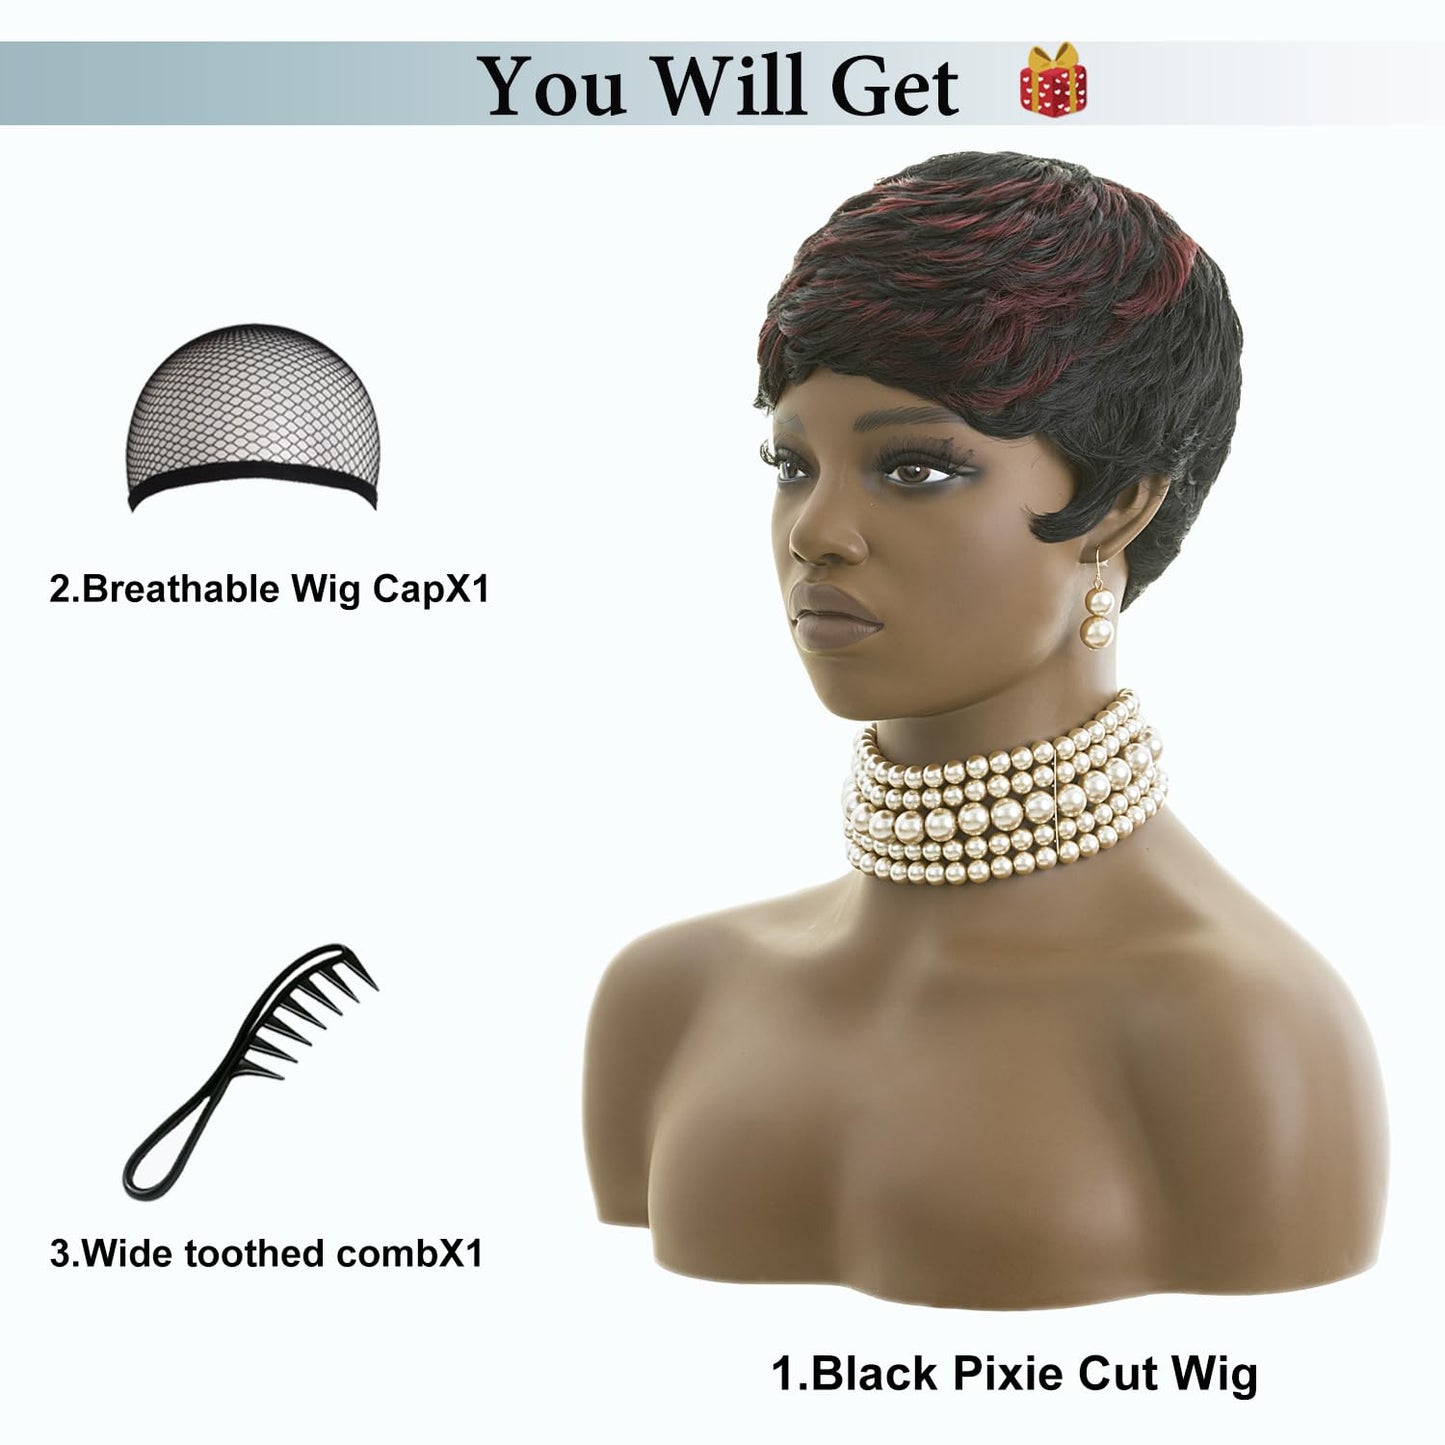 Pixie Cut Wig Short wigs. Natural Wavy Synthetic Hair Wigs Pixie Cut Wig with Bangs Short Curly Layered Pixie Wig for Women